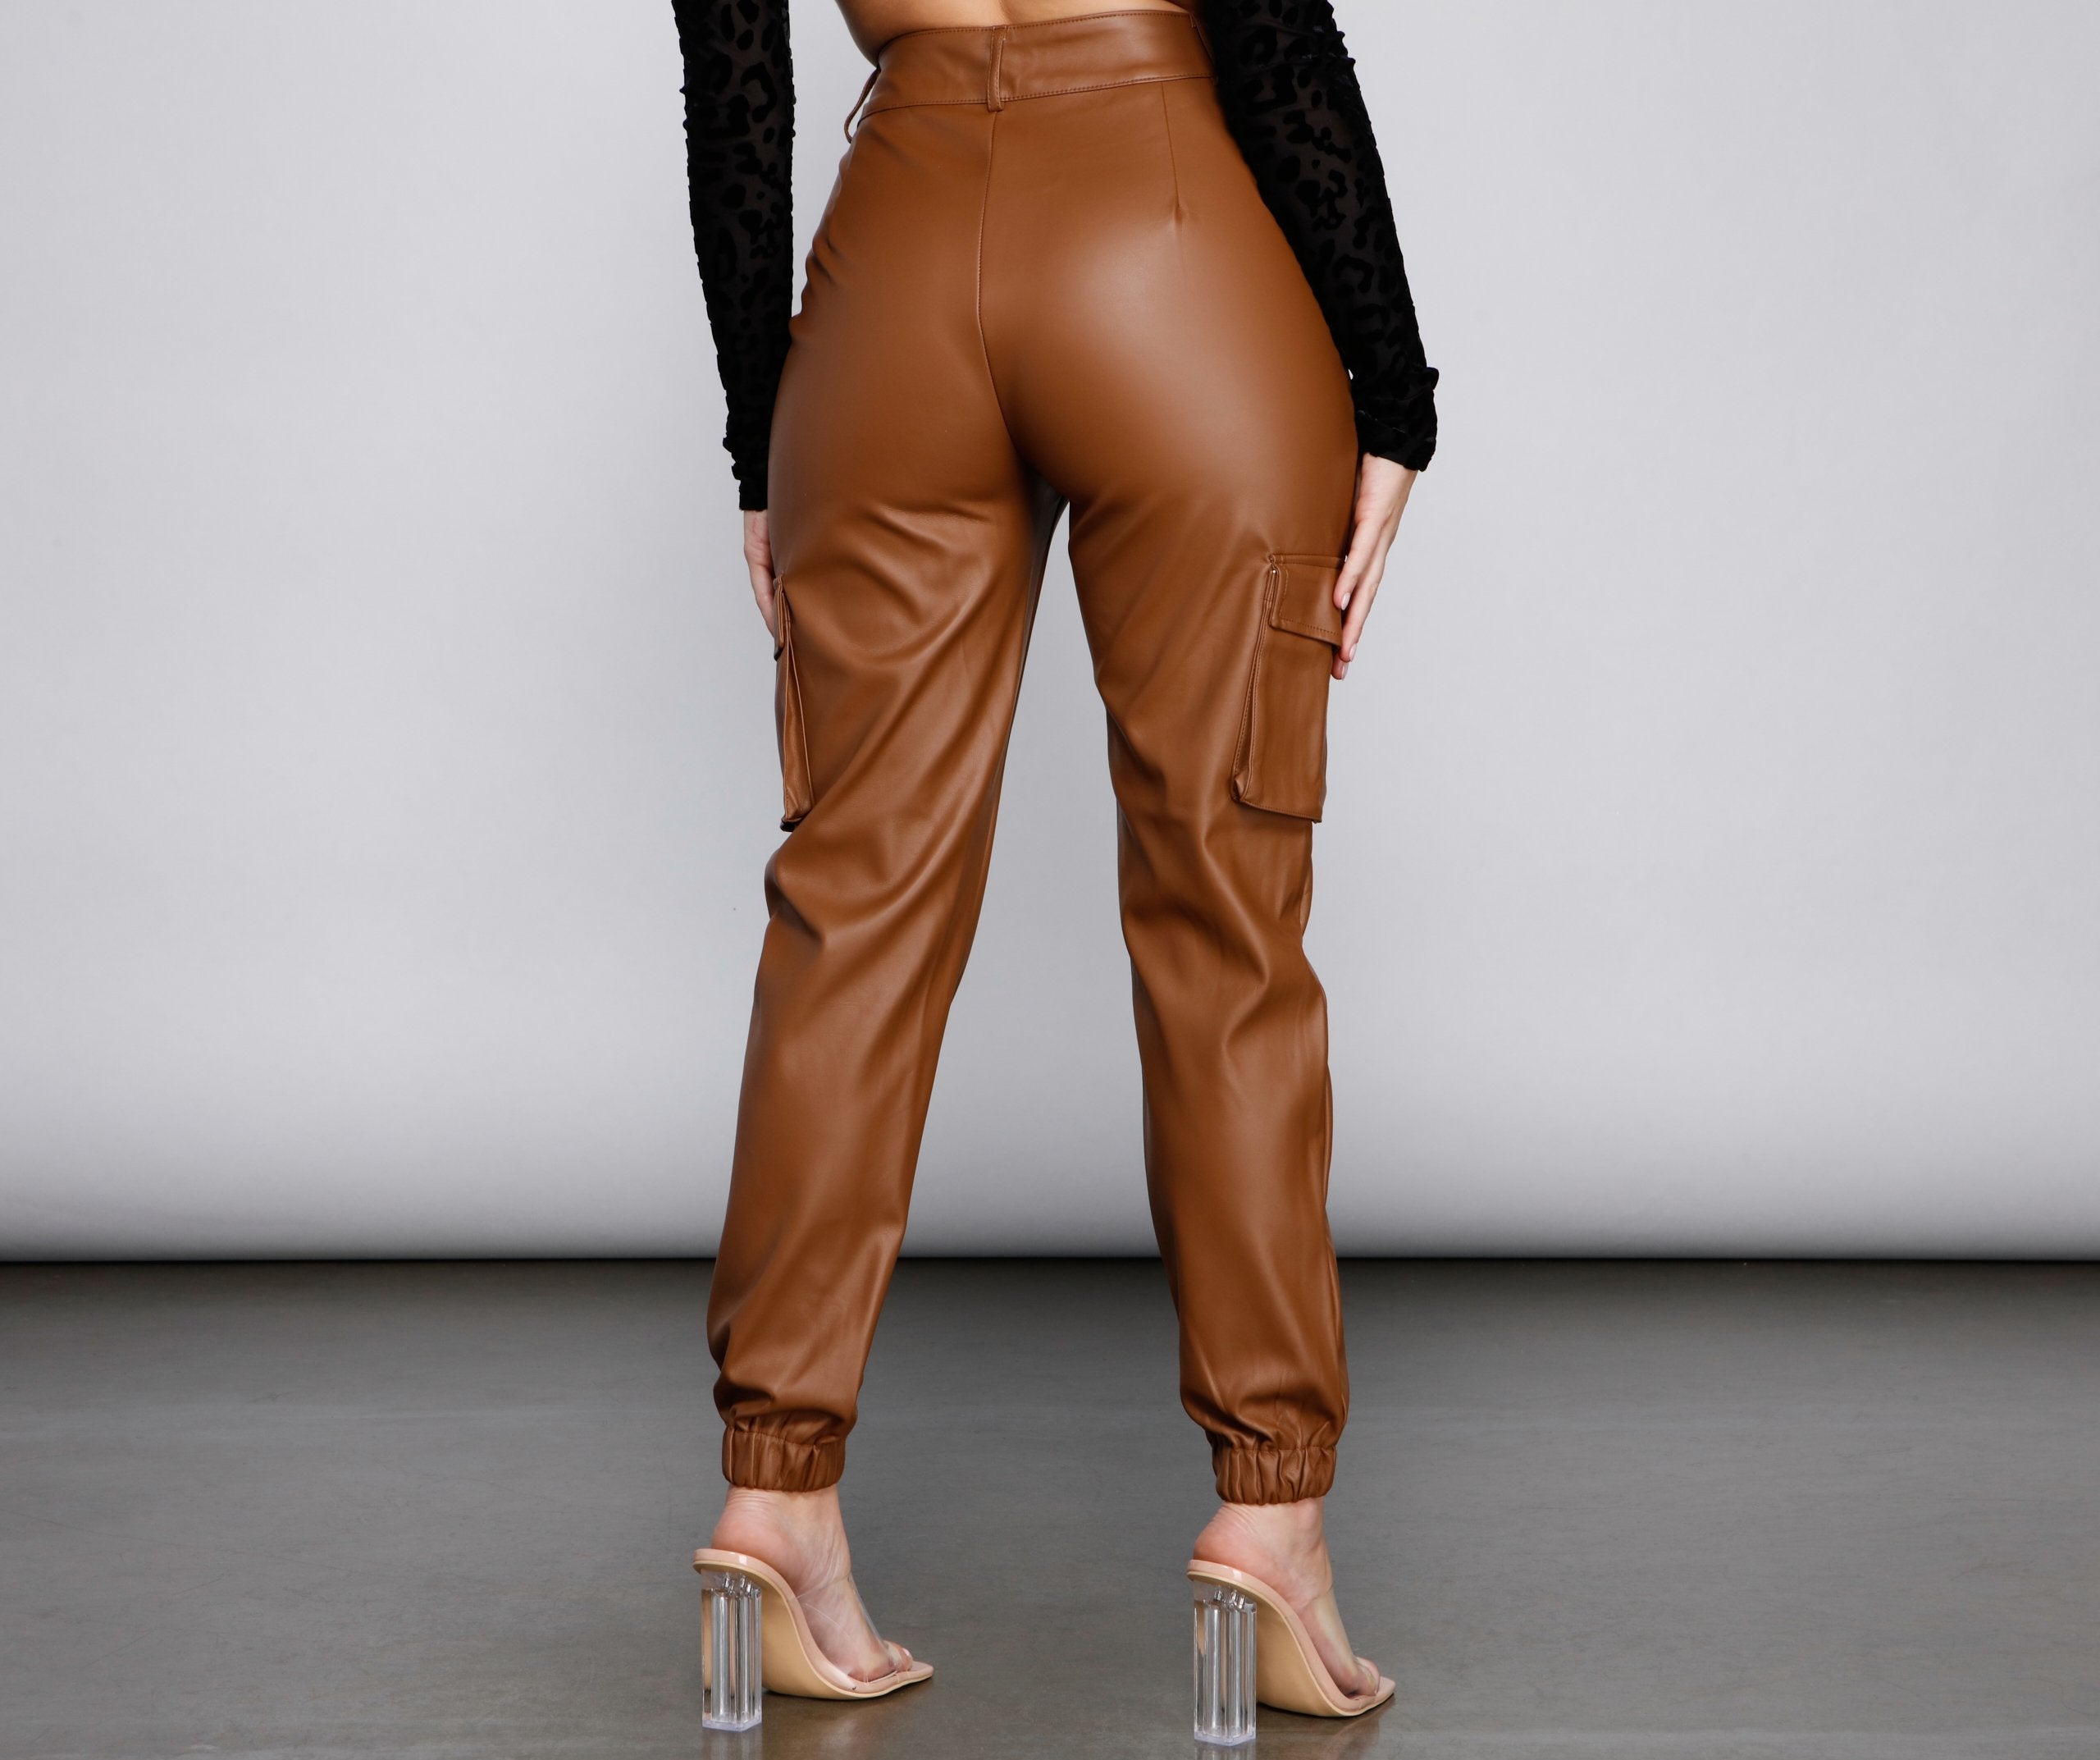 High Waist Faux Leather Cargo Pants - Lady Occasions